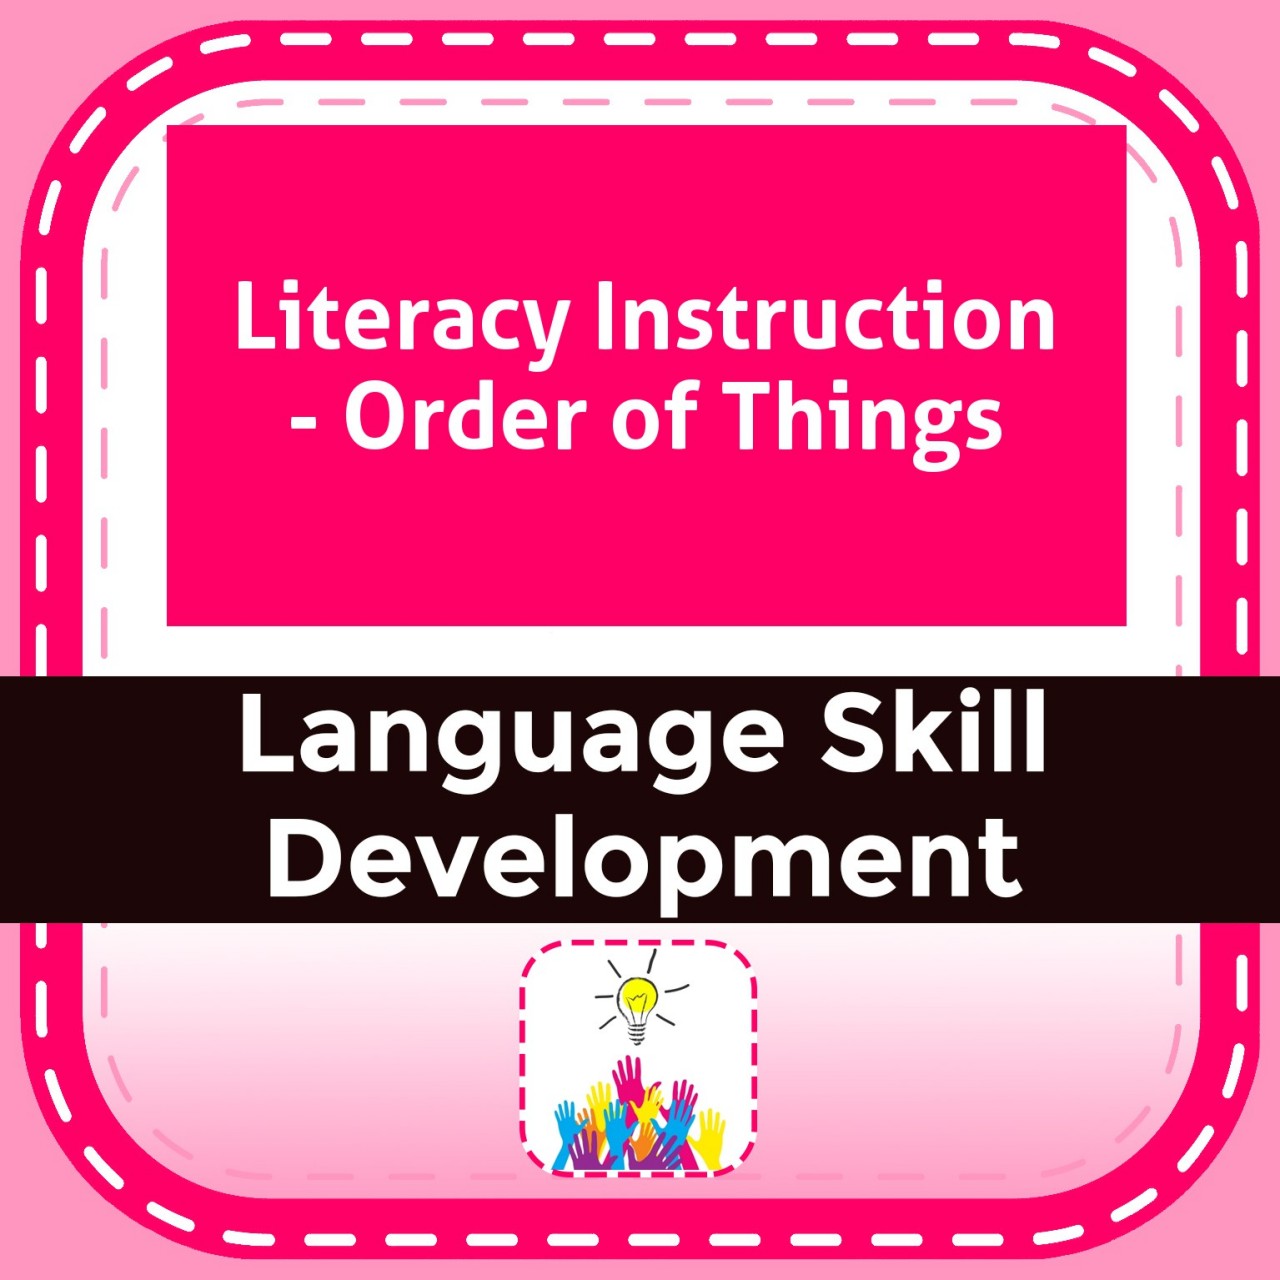 Literacy Instruction - Order of Things